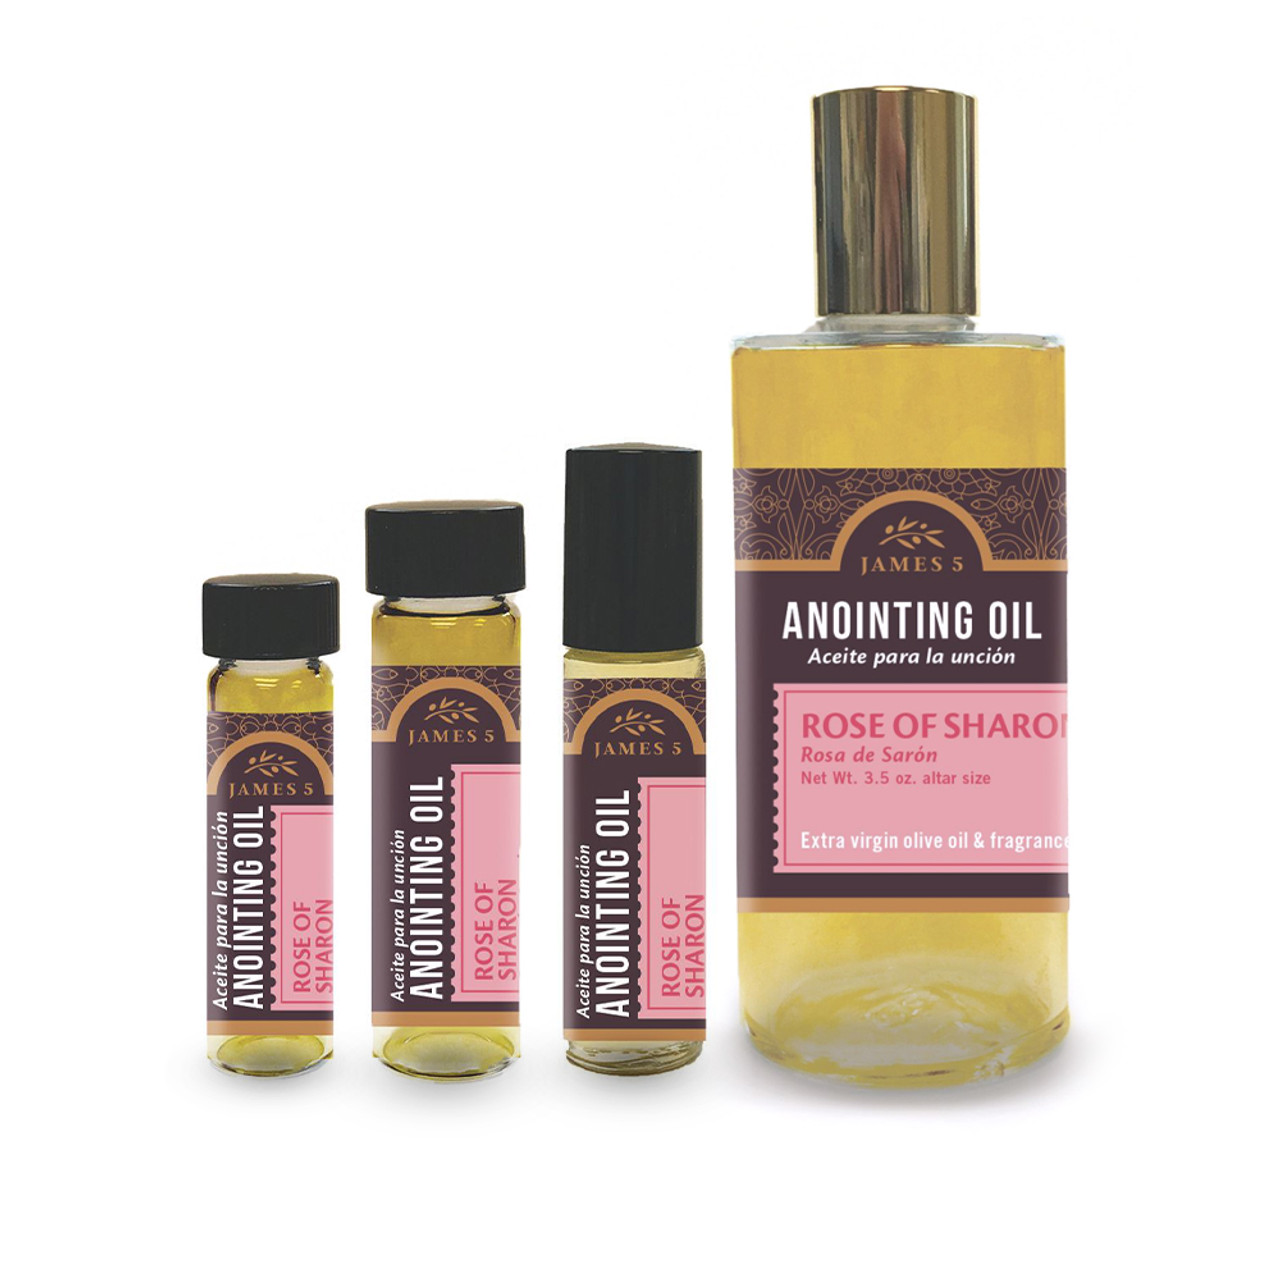 Oil of Wisdom Holy Anointing Oil